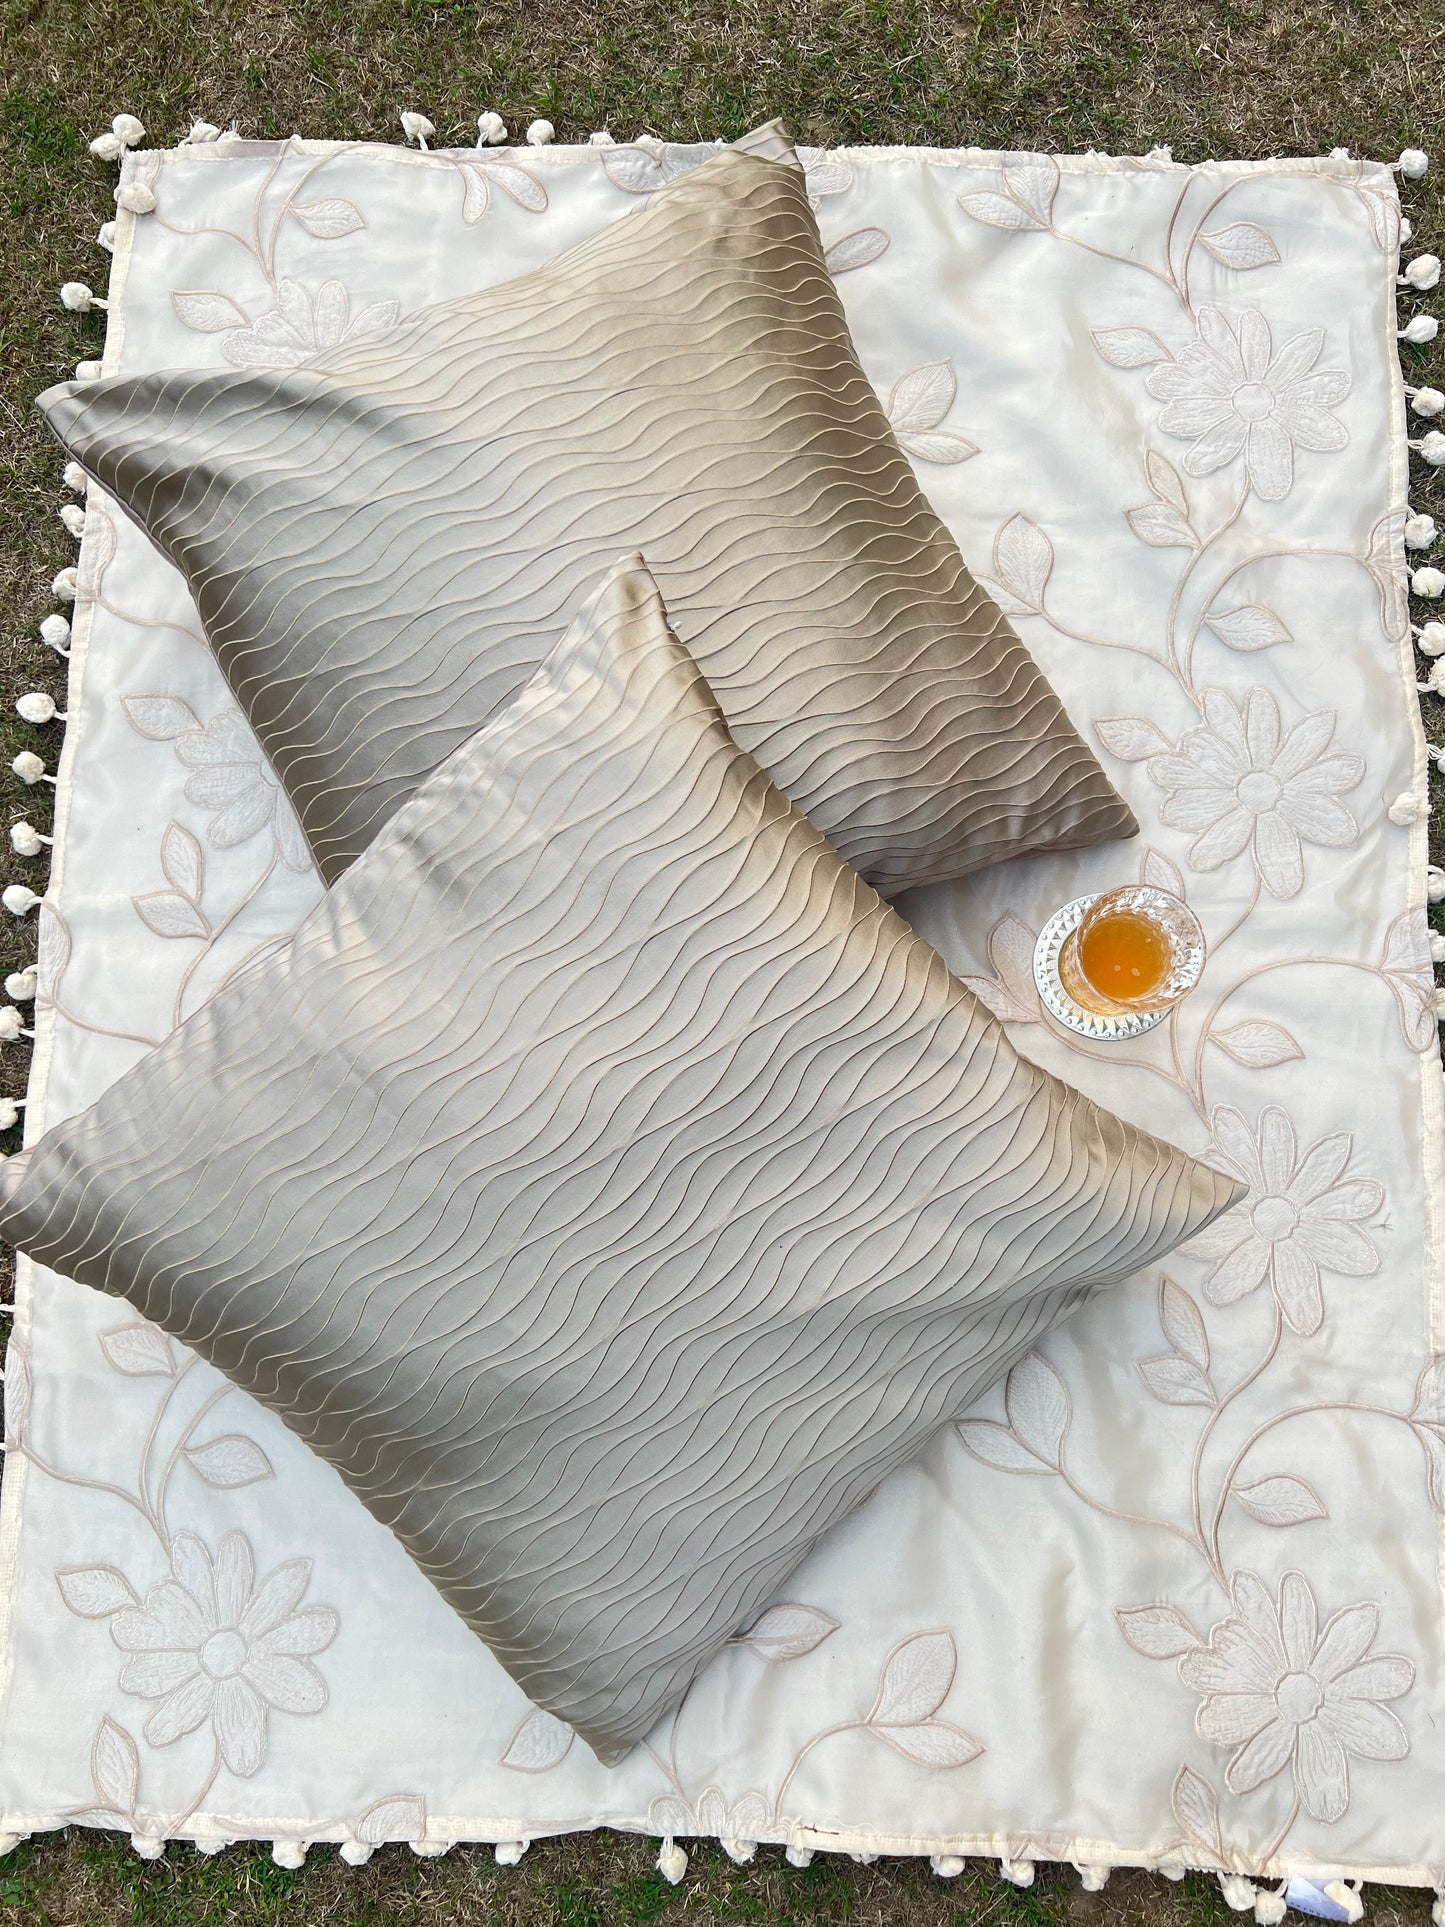 Contour Cushion Cover Sets at Kamakhyaa by Aetherea. This item is Abstract, Beige, Cotton, Cushion covers, Home, Lines, Plain, Solid, Upcycled, Wavy